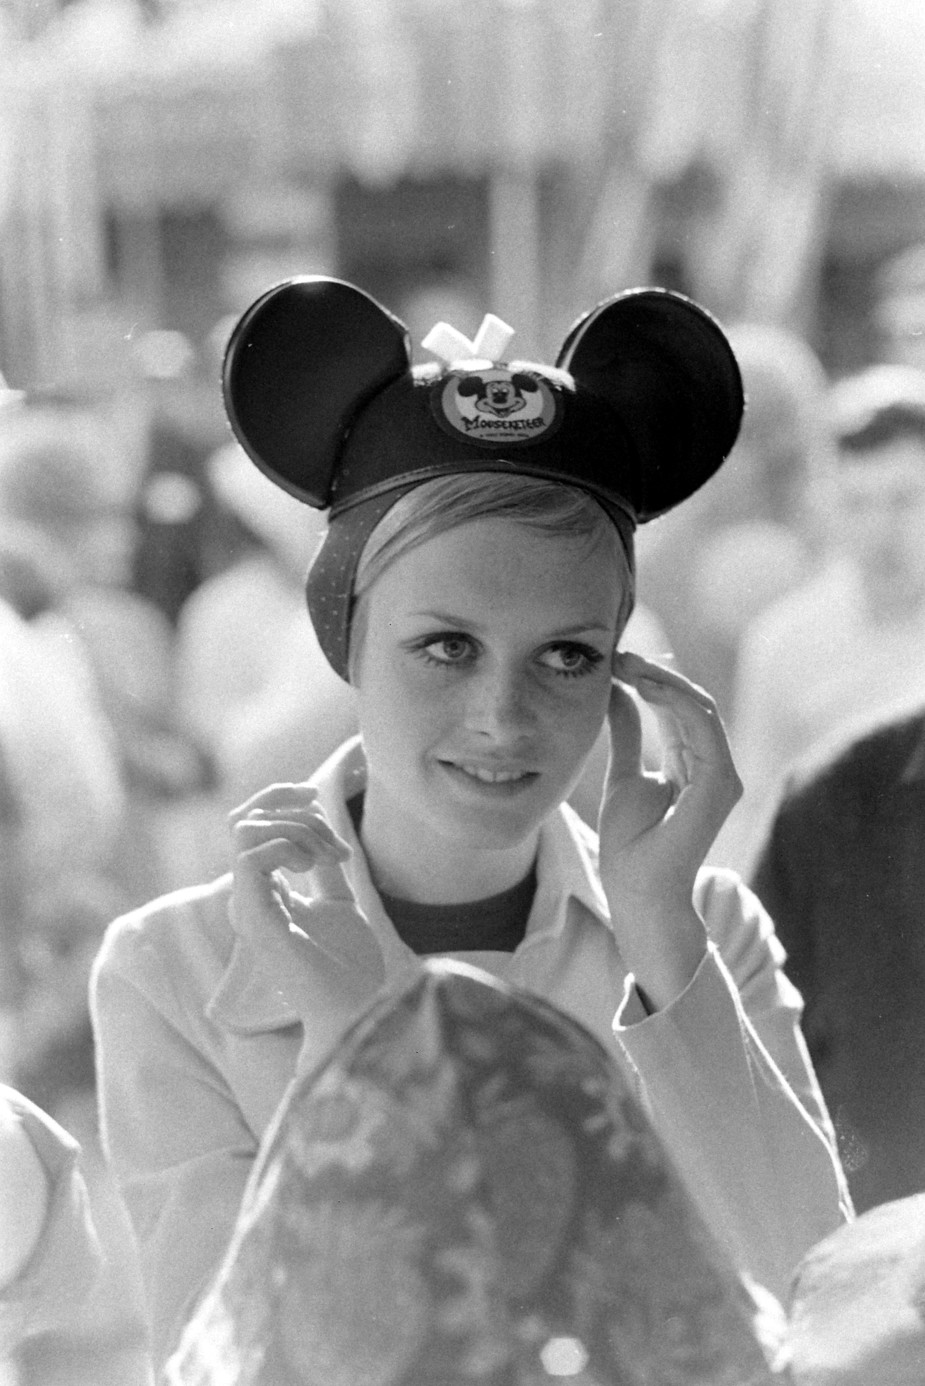 British model Twiggy (born Lesley Hornby, later Lawson) adjusts a pair of Mickey Mouse 'ears' at Disneyland, Anaheim, California, 1967. (Photo by Ralph Crane/The LIFE Picture Collection/Getty Images)